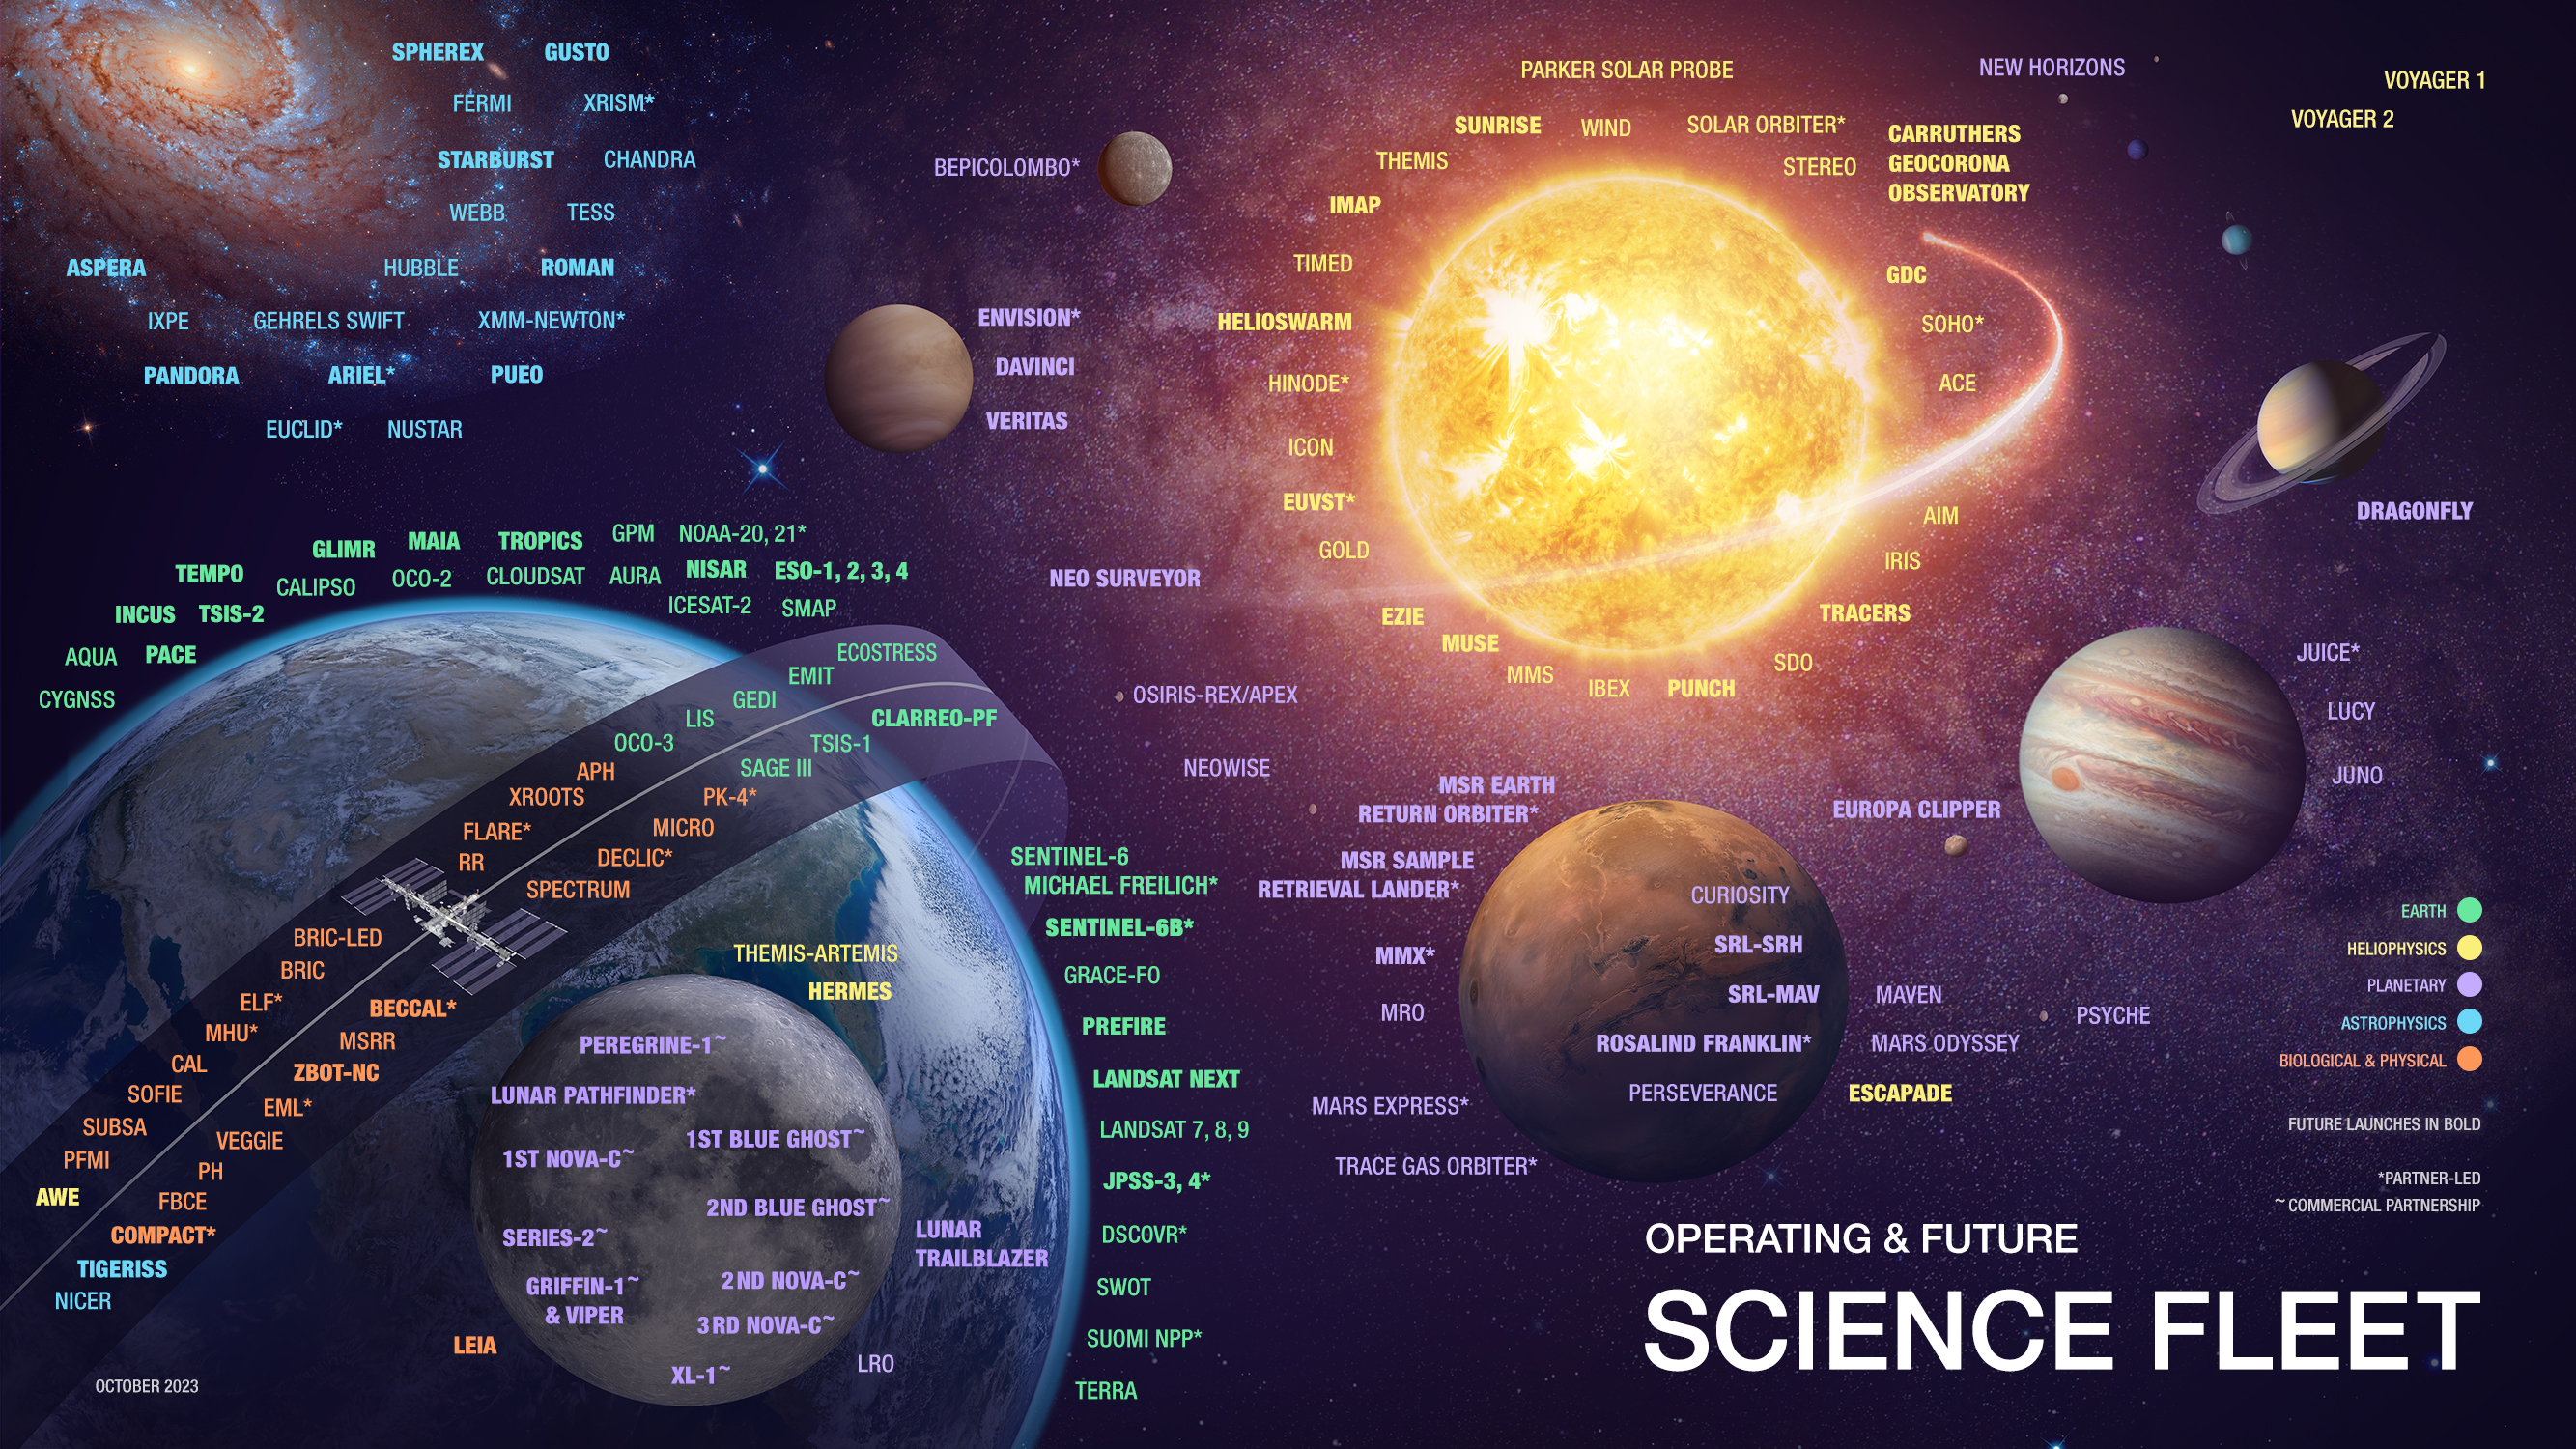 An infographic displaying all of the NASA Science mission fleet spacecraft in their approximate location in our universe.